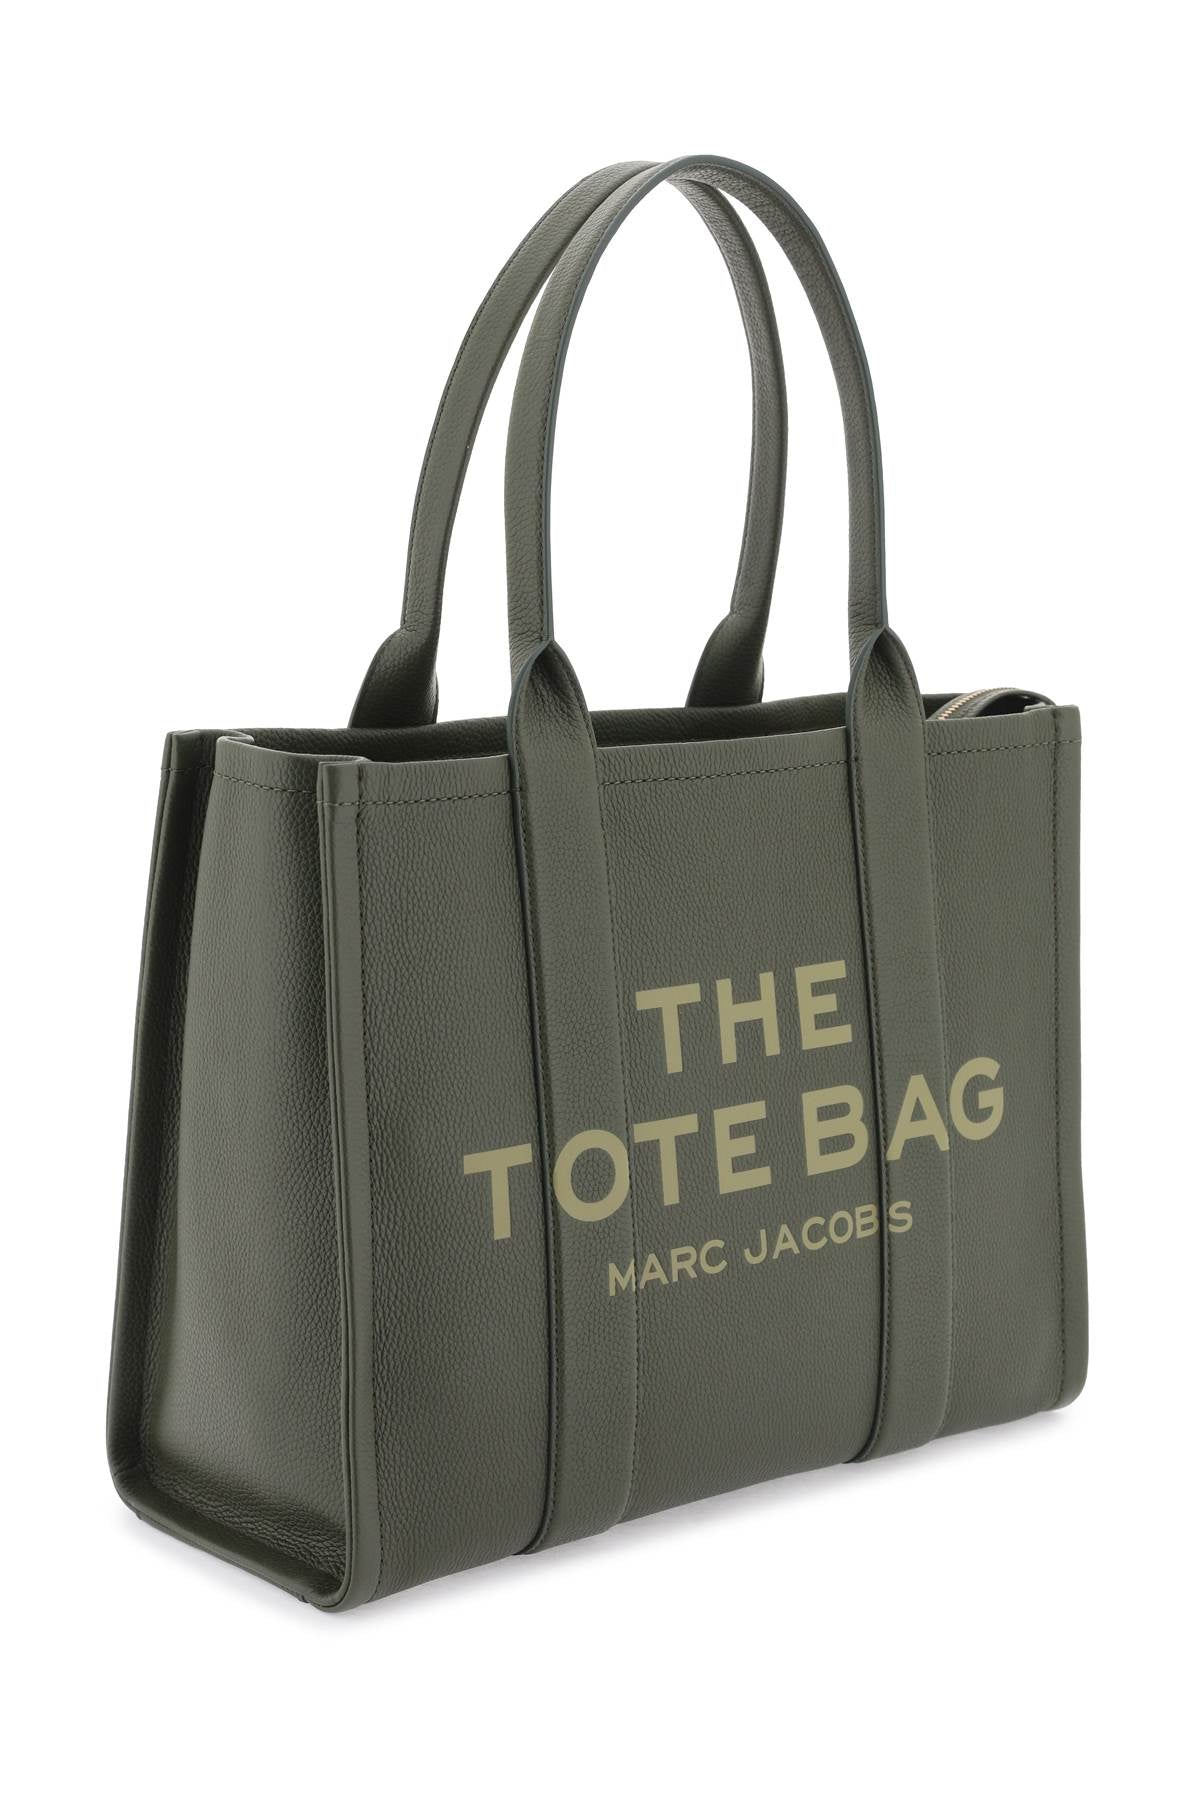 Marc jacobs the leather large tote bag-2